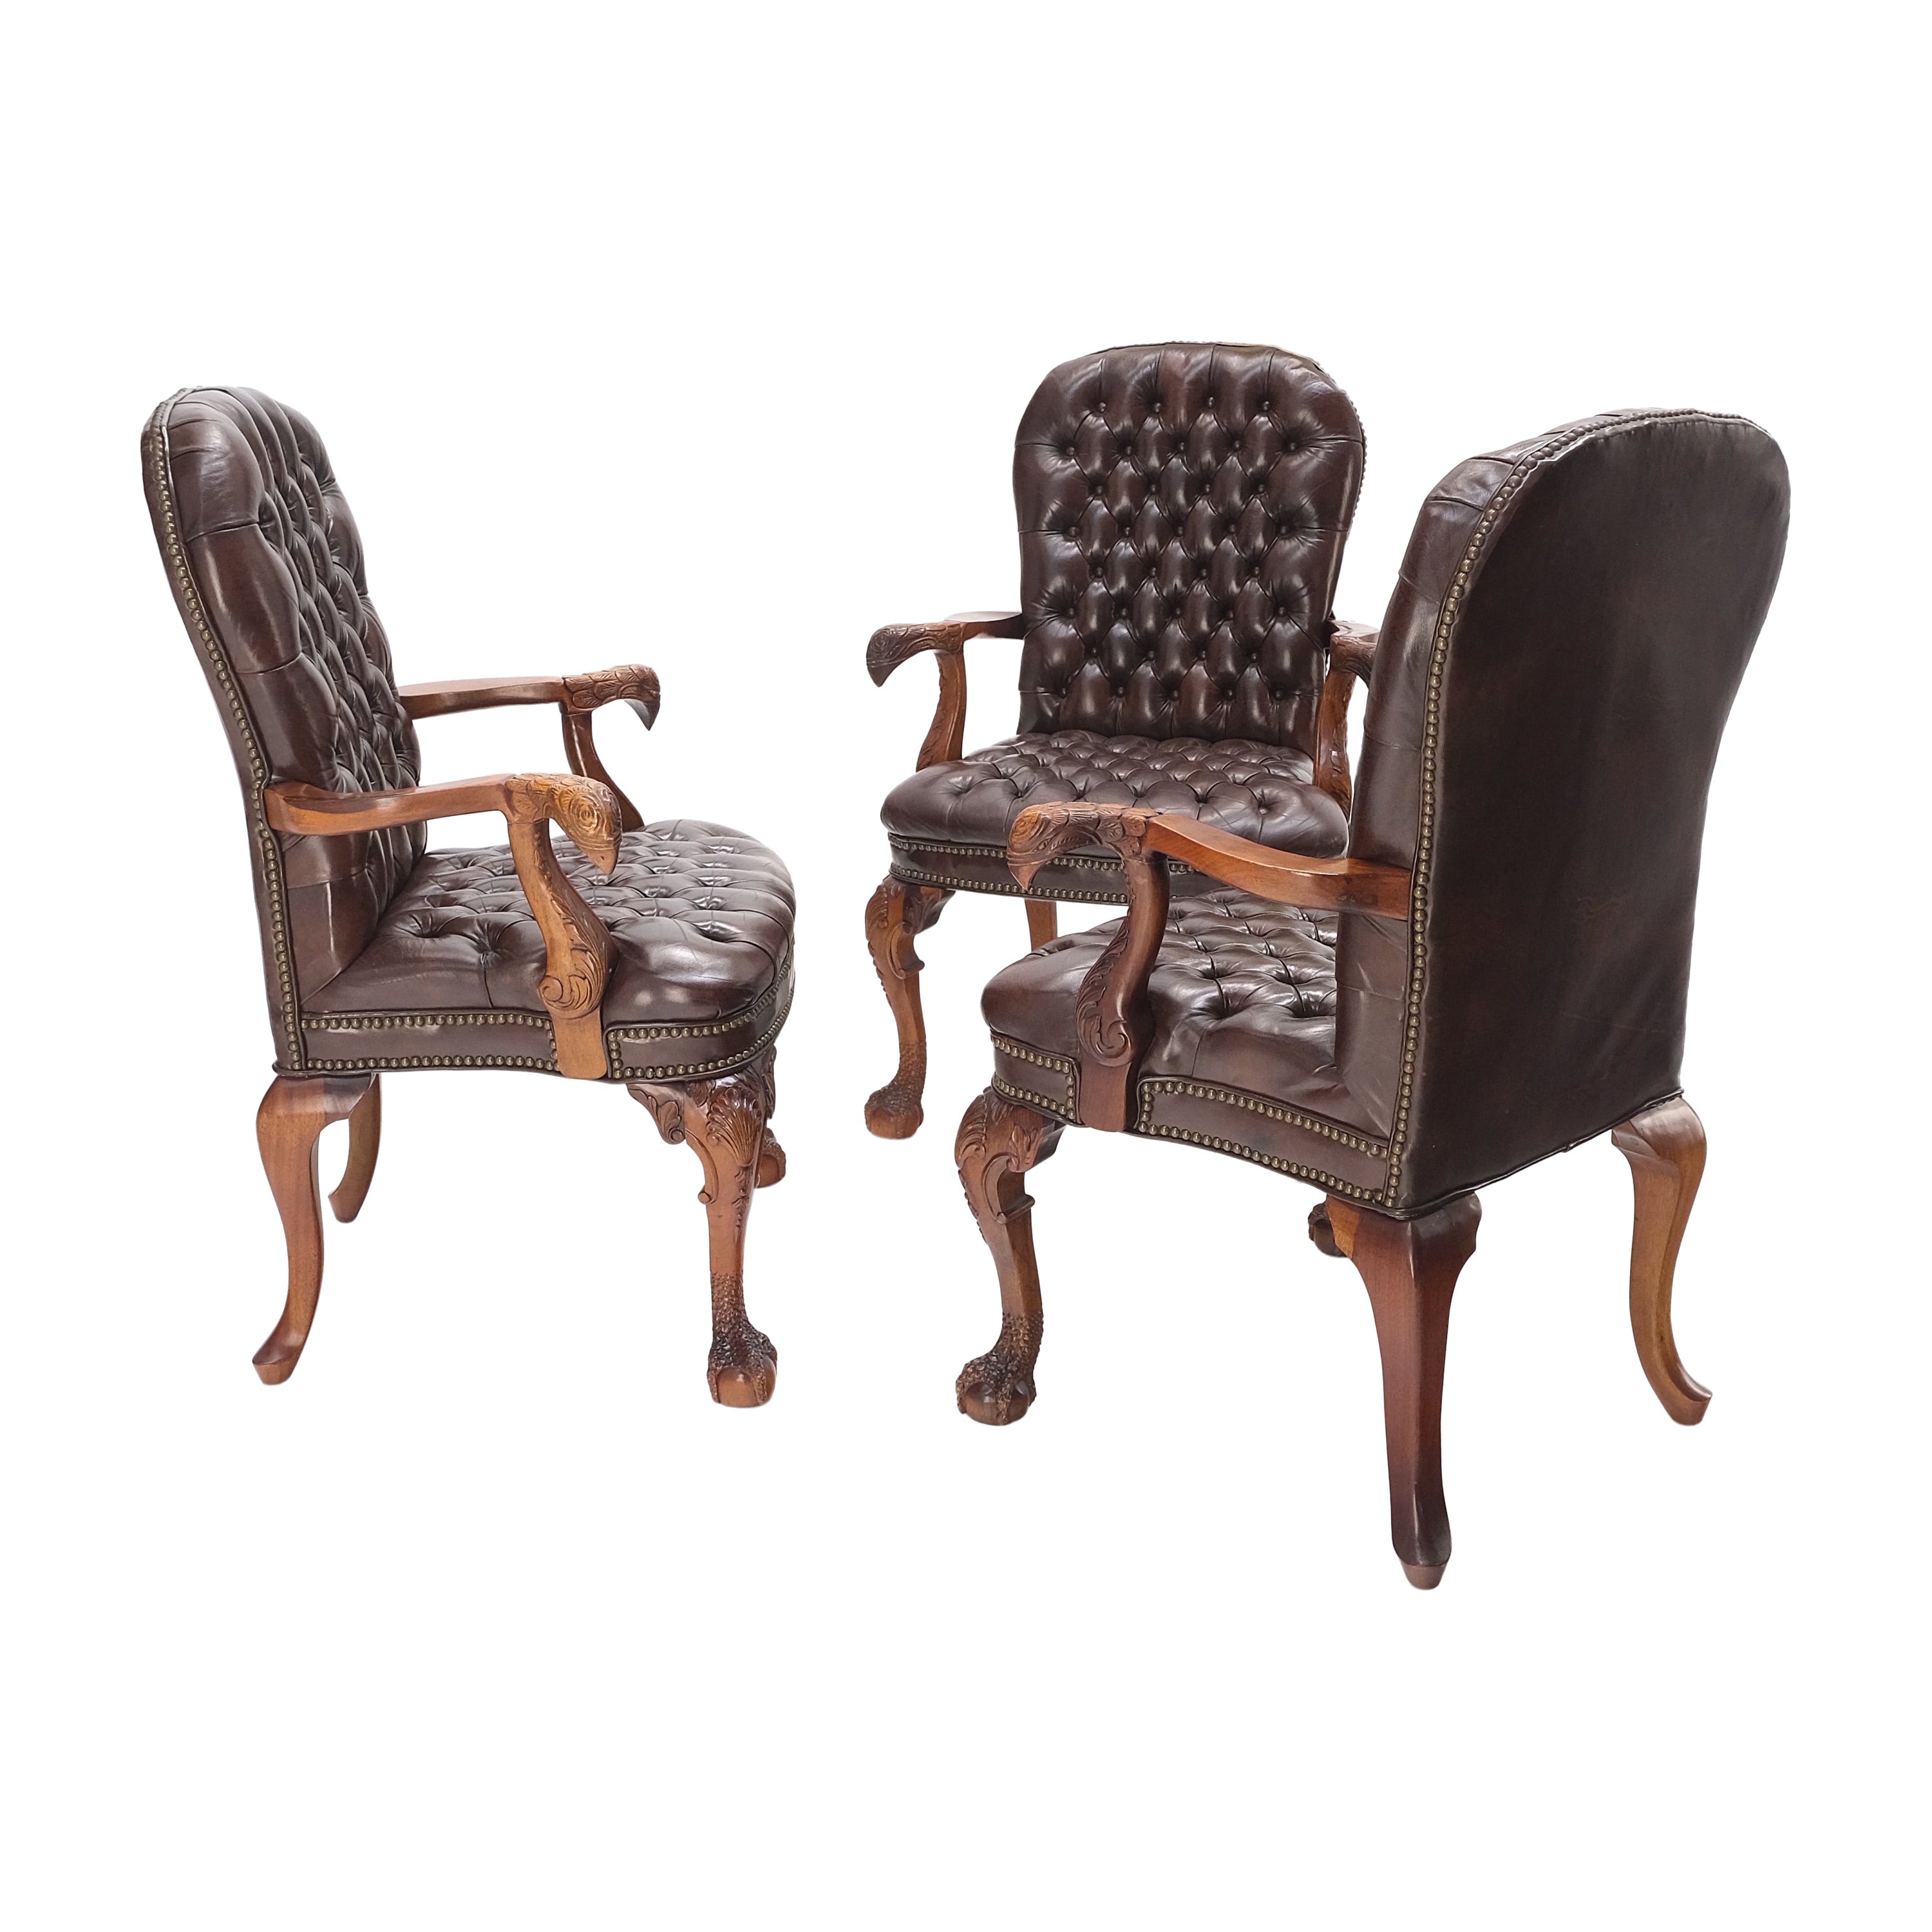 Brown Leather Chesterfield Backs & Seat Carved Walnut Armchairs Fireside Chairs